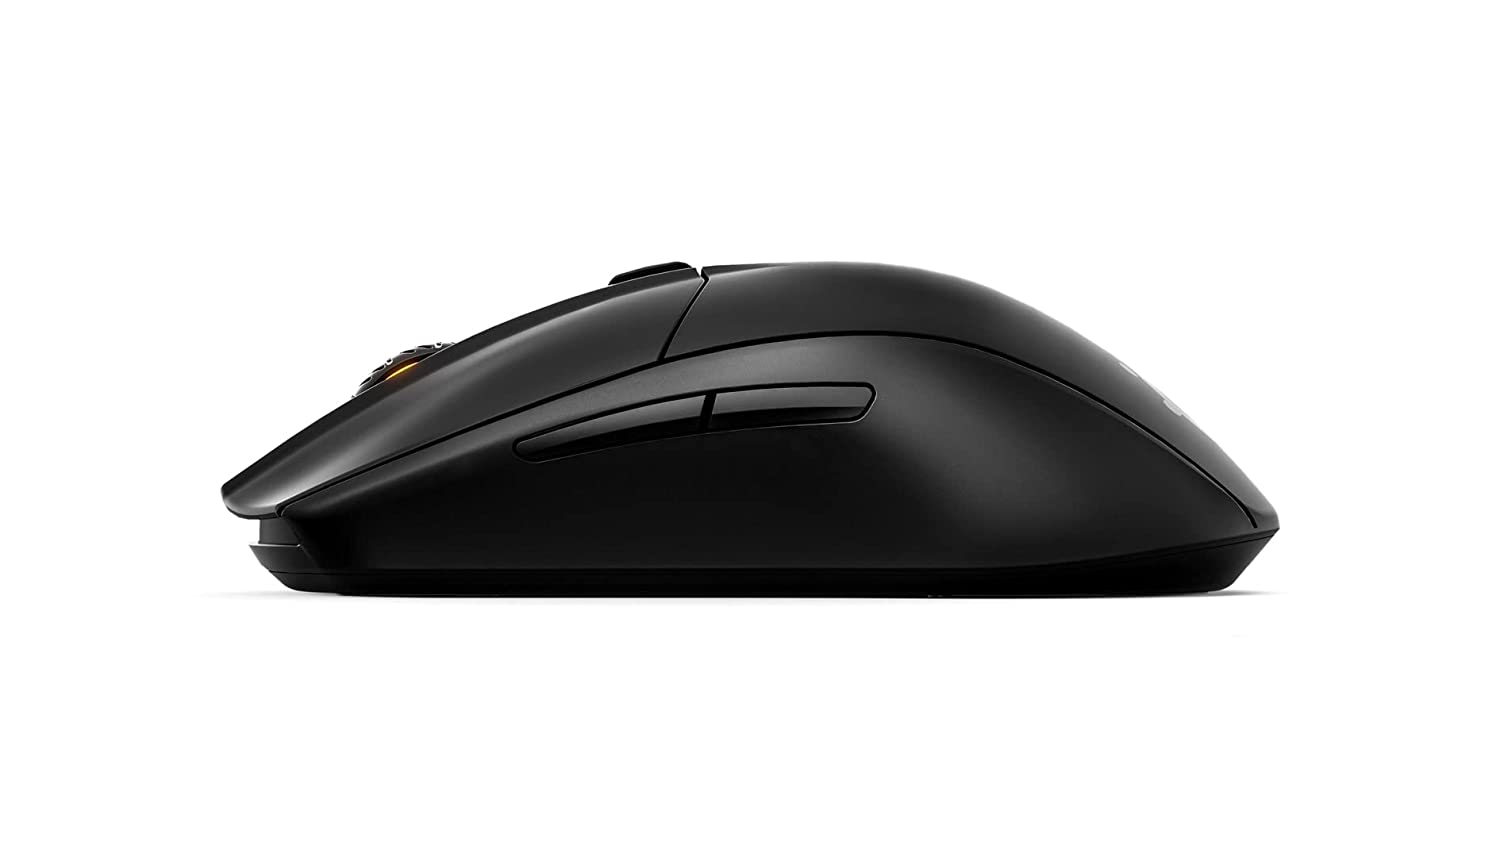 SteelSeries Rival 3 Wireless Optical Gaming Mouse